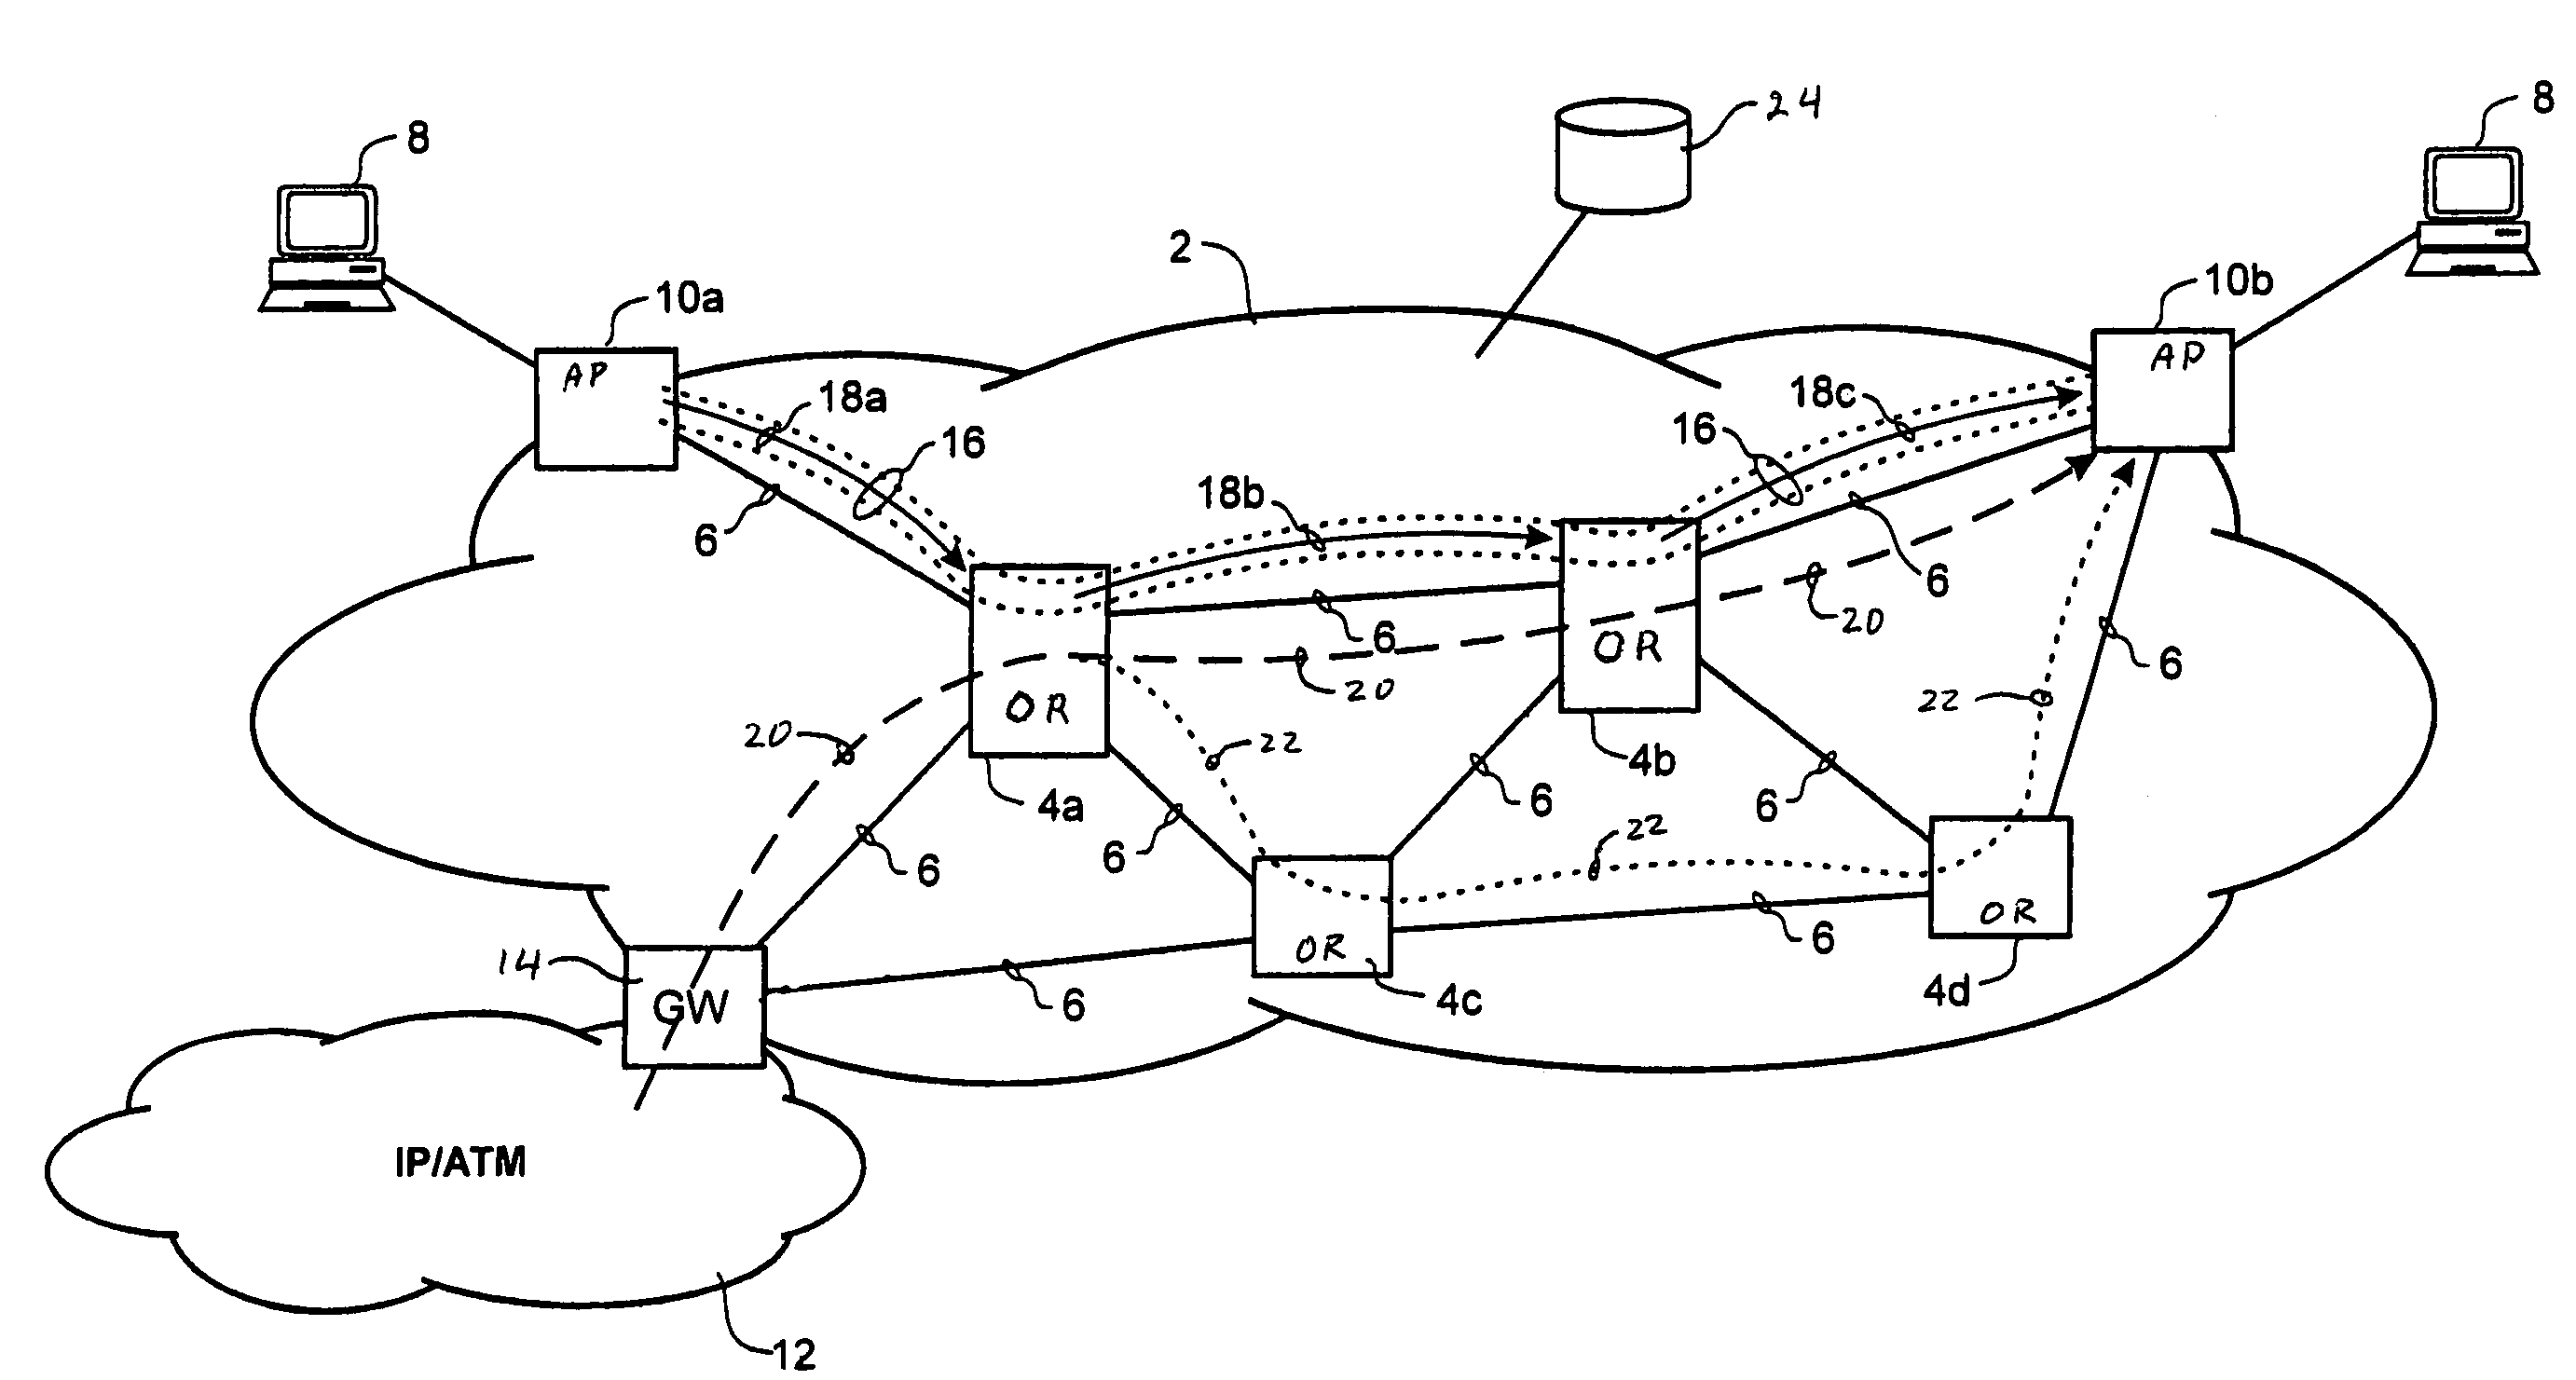 Dynamic allocation of shared network resources between connection-oriented and connectionless traffic